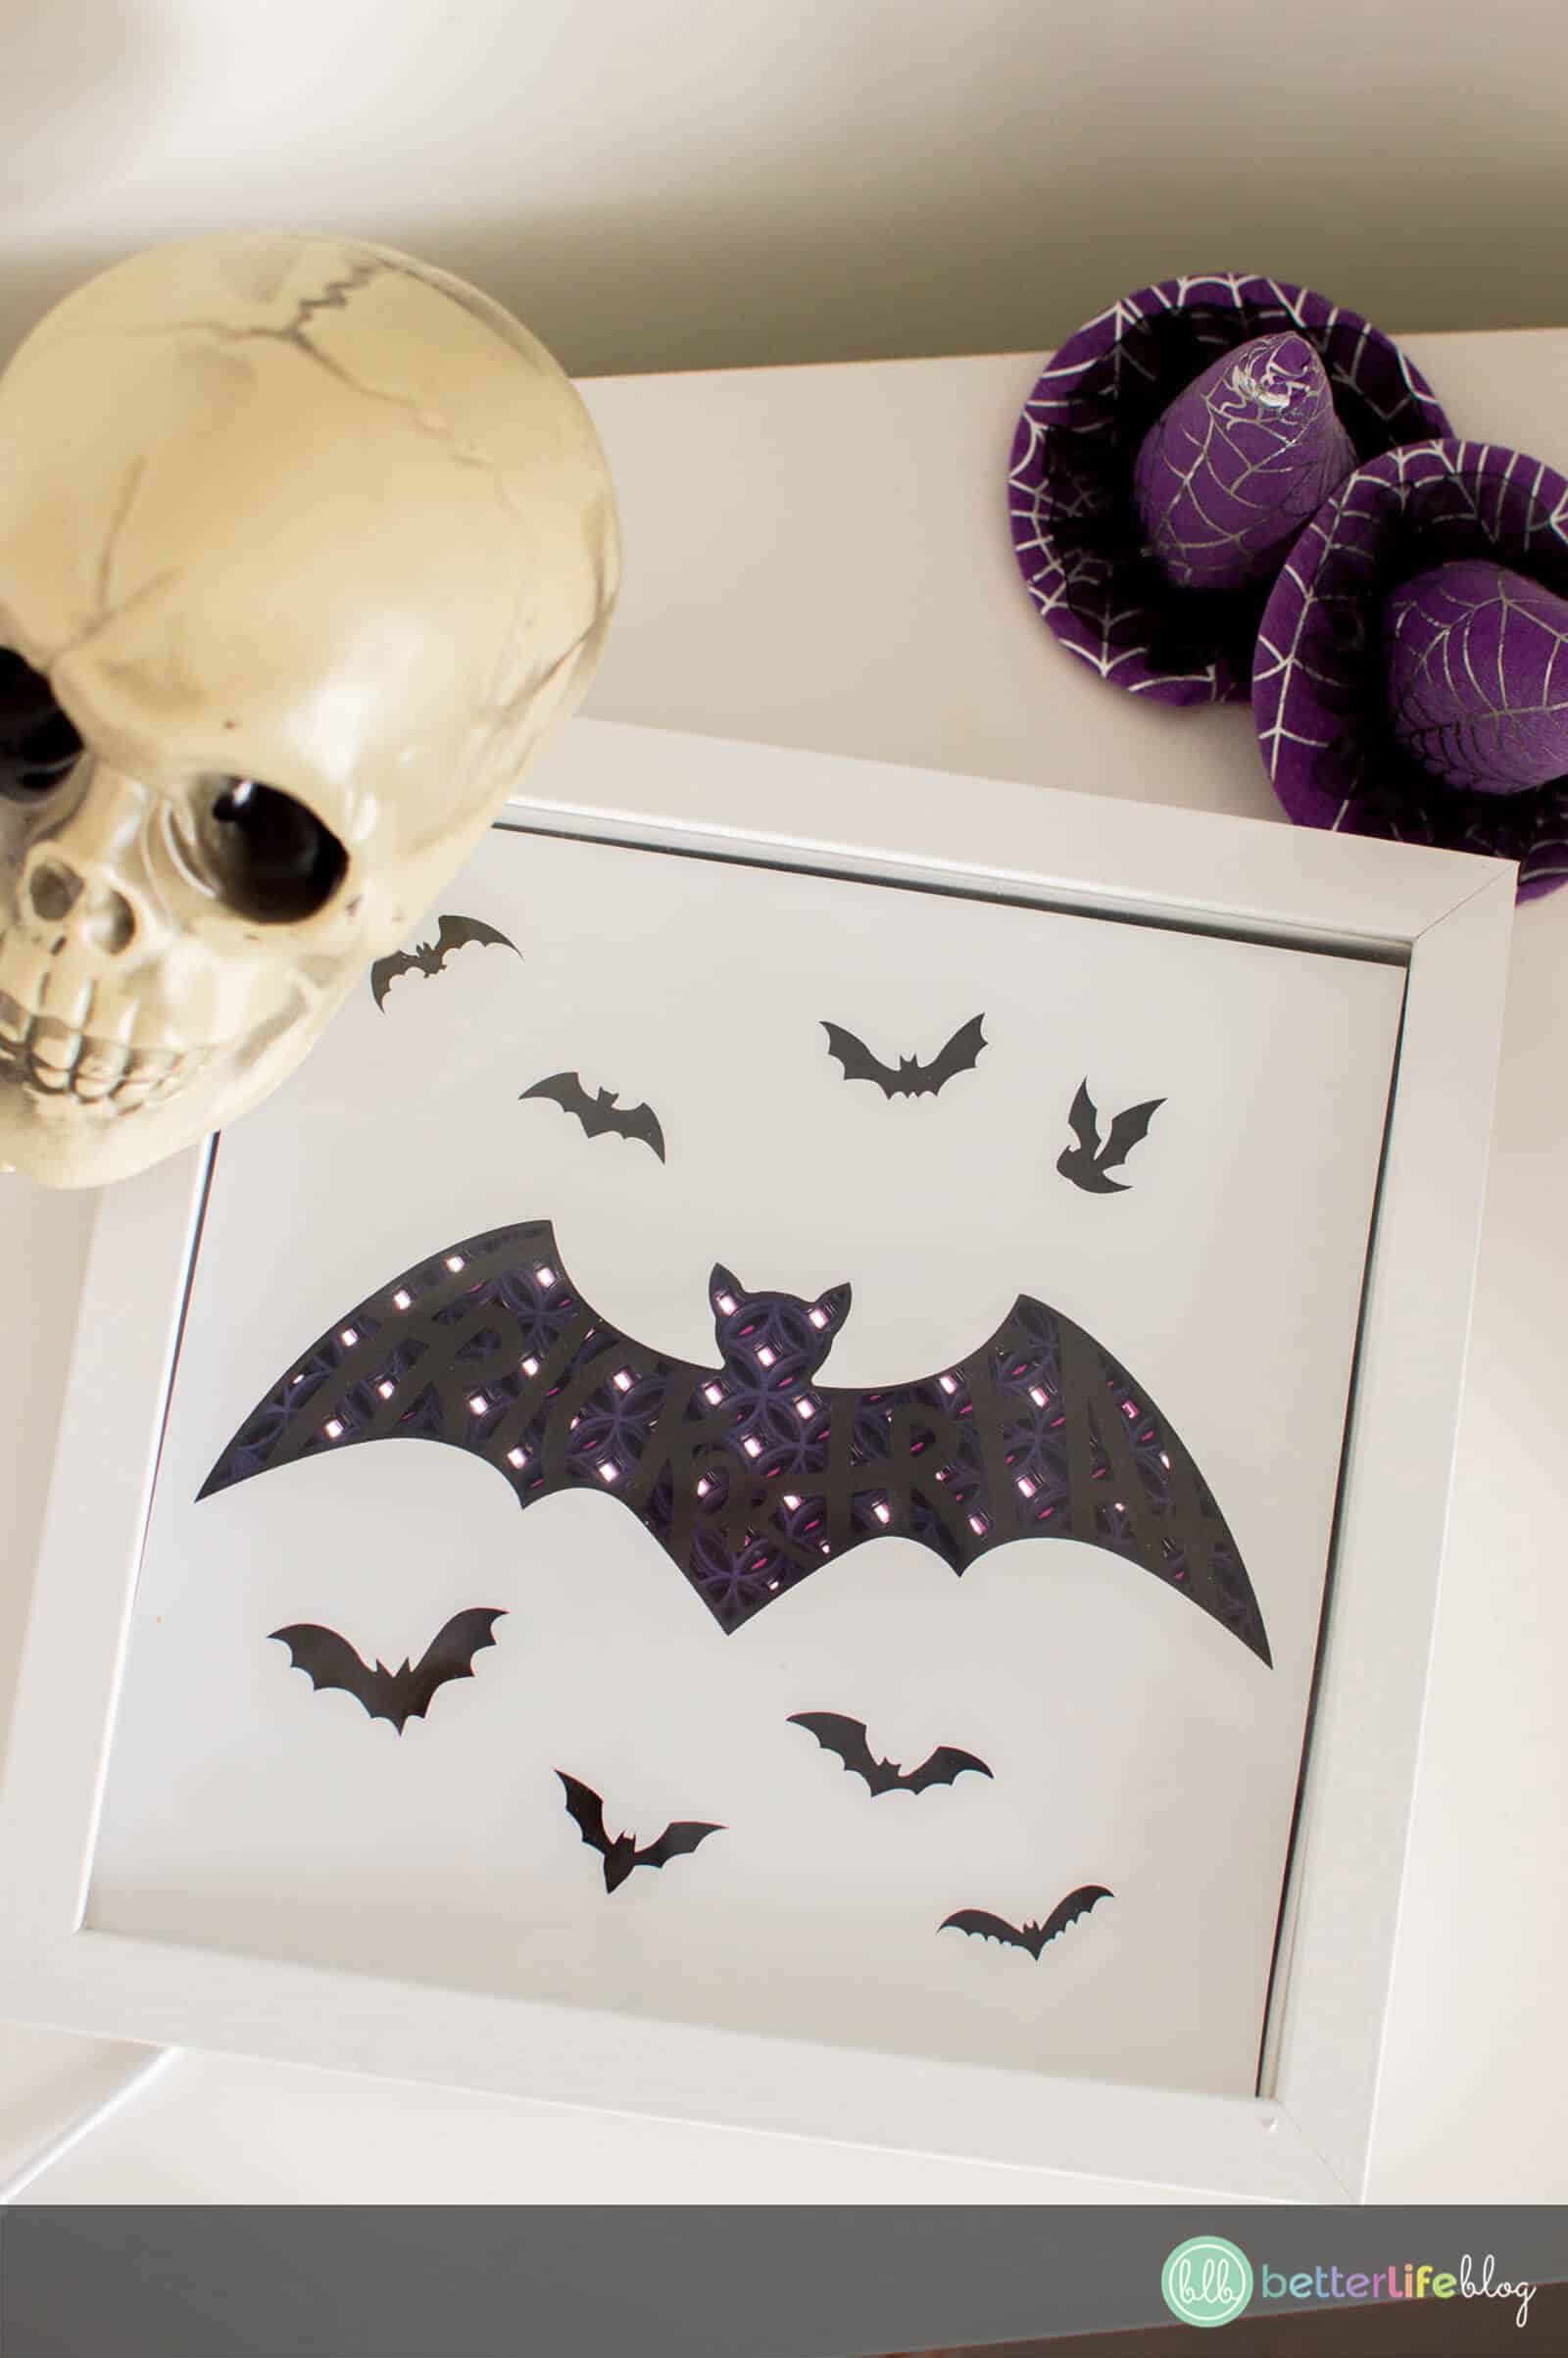 You’ll look like a crafting pro once you put together this super easy Halloween Shadow Box! It boasts a beautiful design that’s both intricate and detailed – you’ll be so surprised how simple it is to DIY!